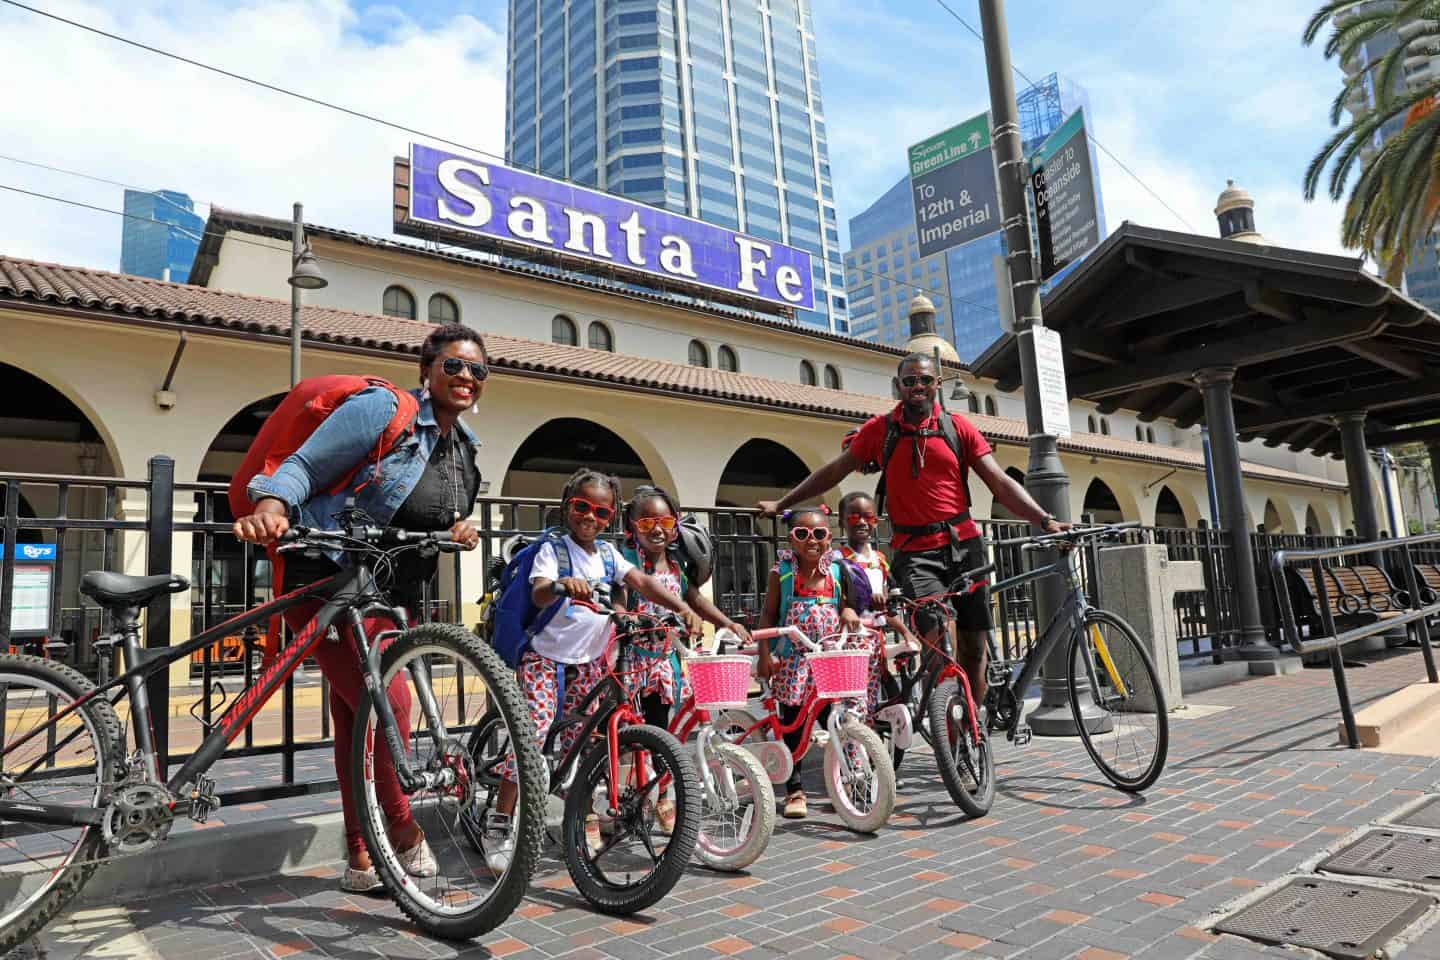 Exploring San Diego on Bikes after arriving on the Amtrak